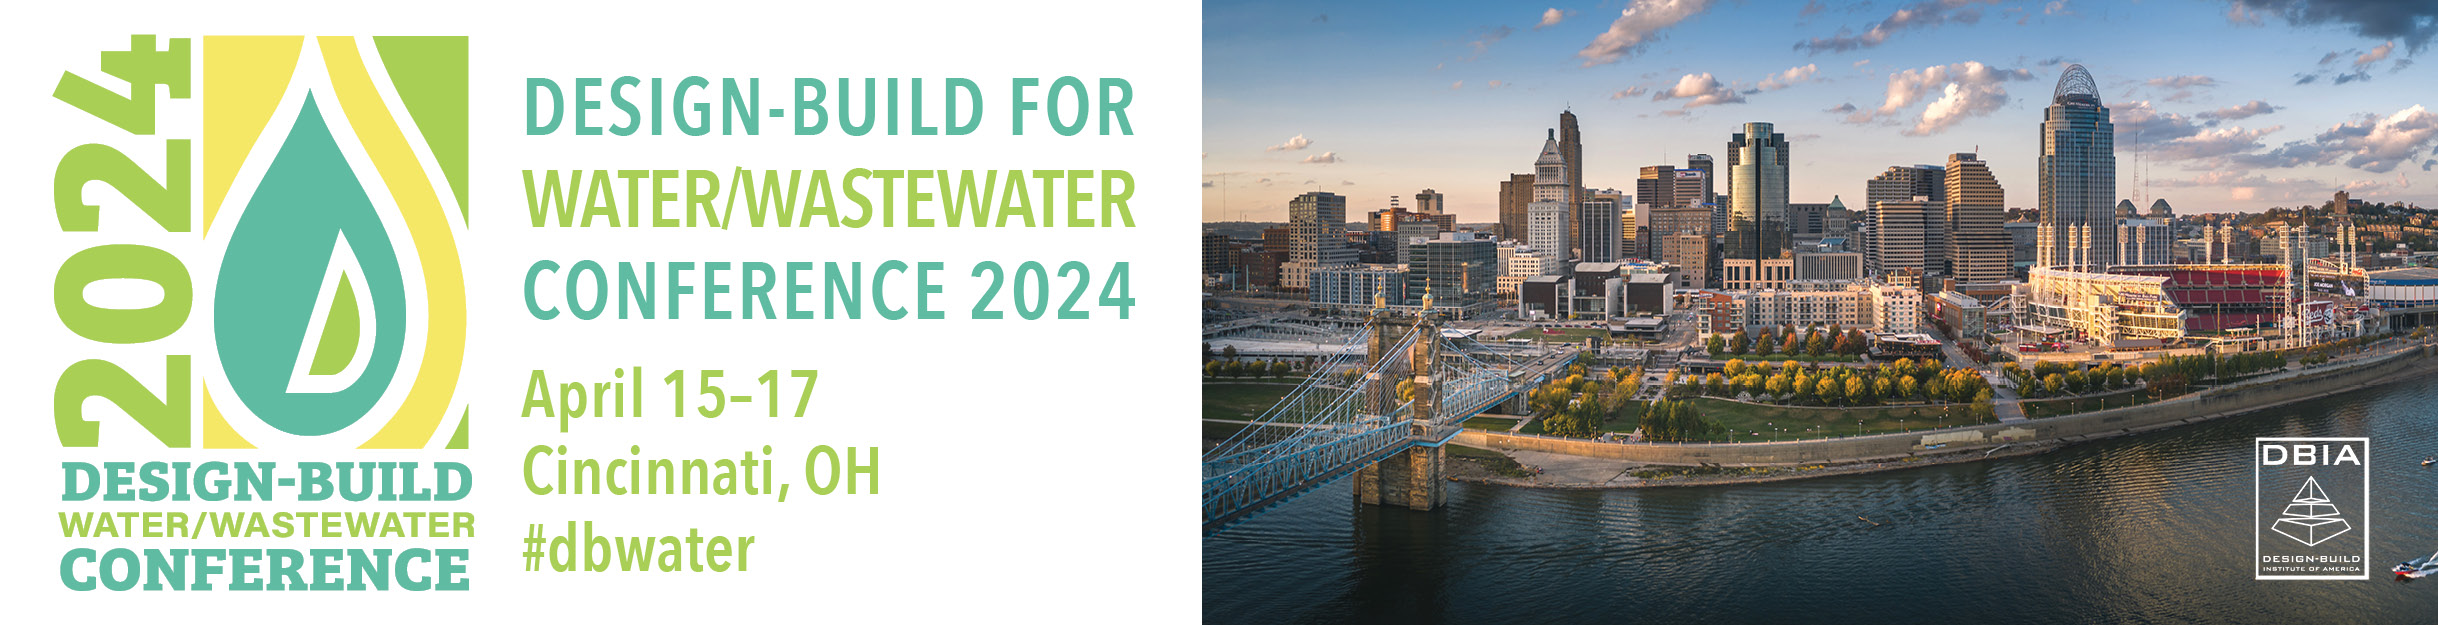 2024 Design-Build for Water/Wastewater Conference